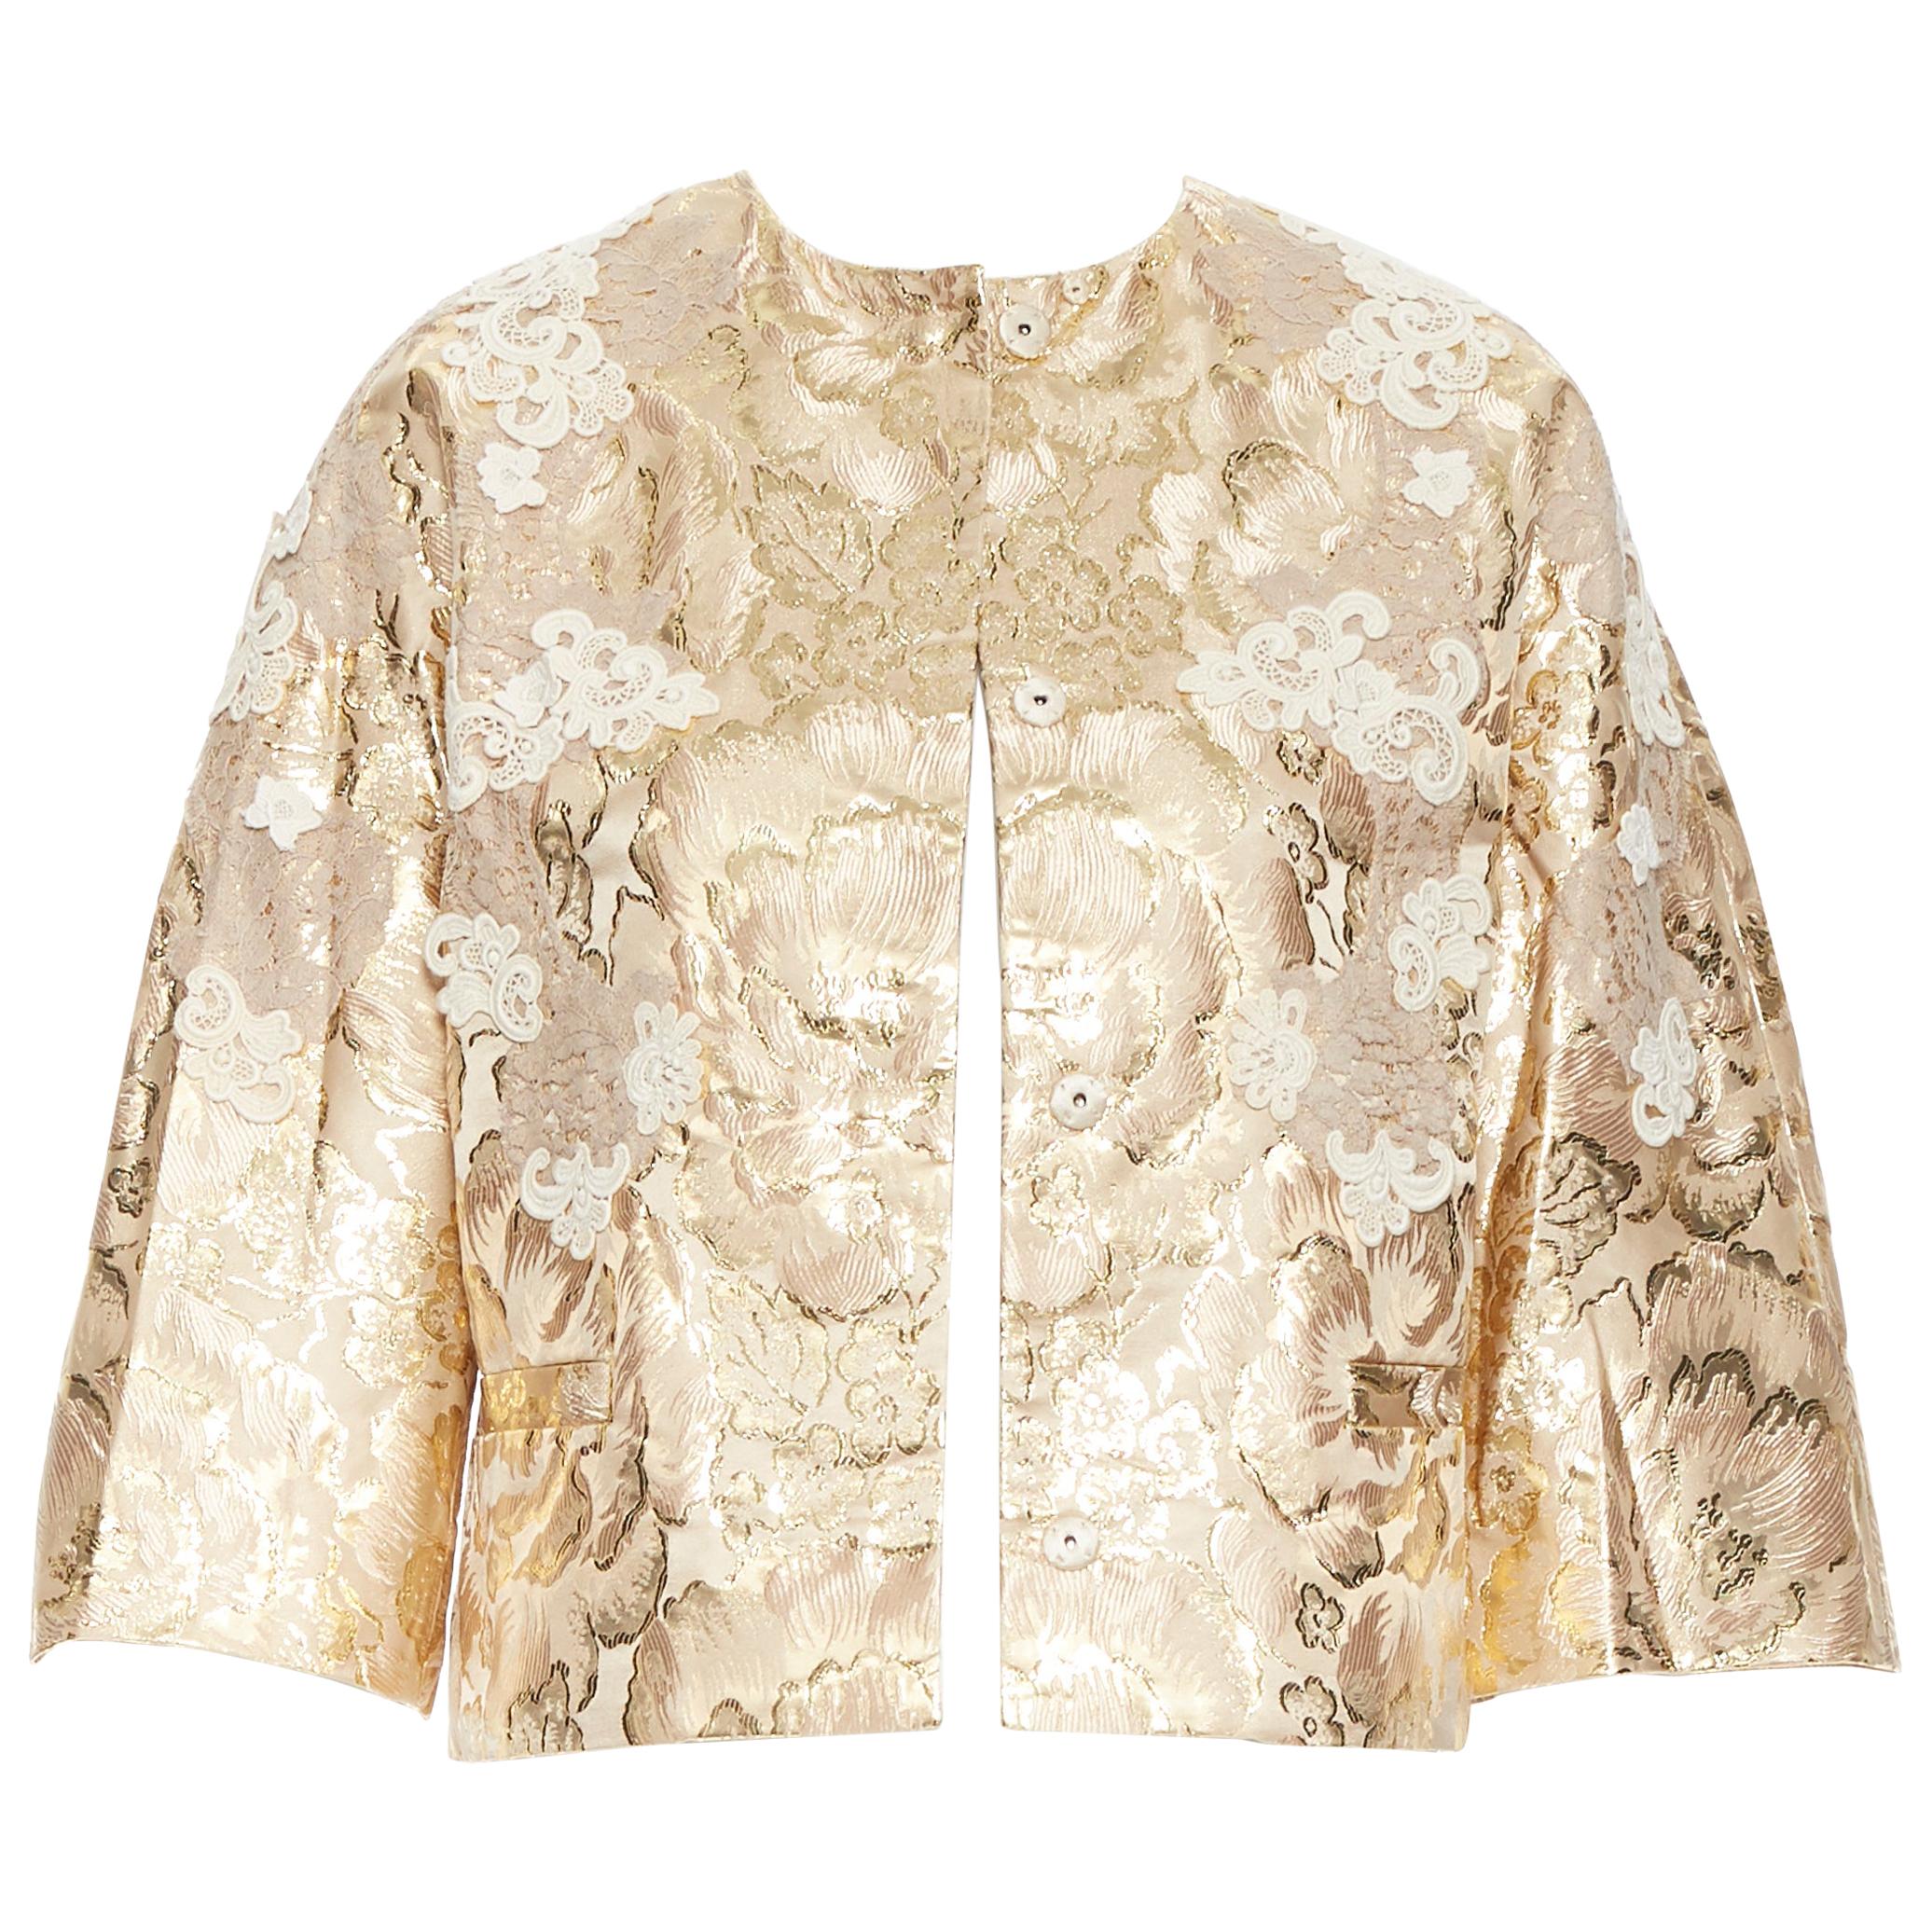 new DOLCE GABBANA metallic gold lace applique floral brocade jacket IT36 XS